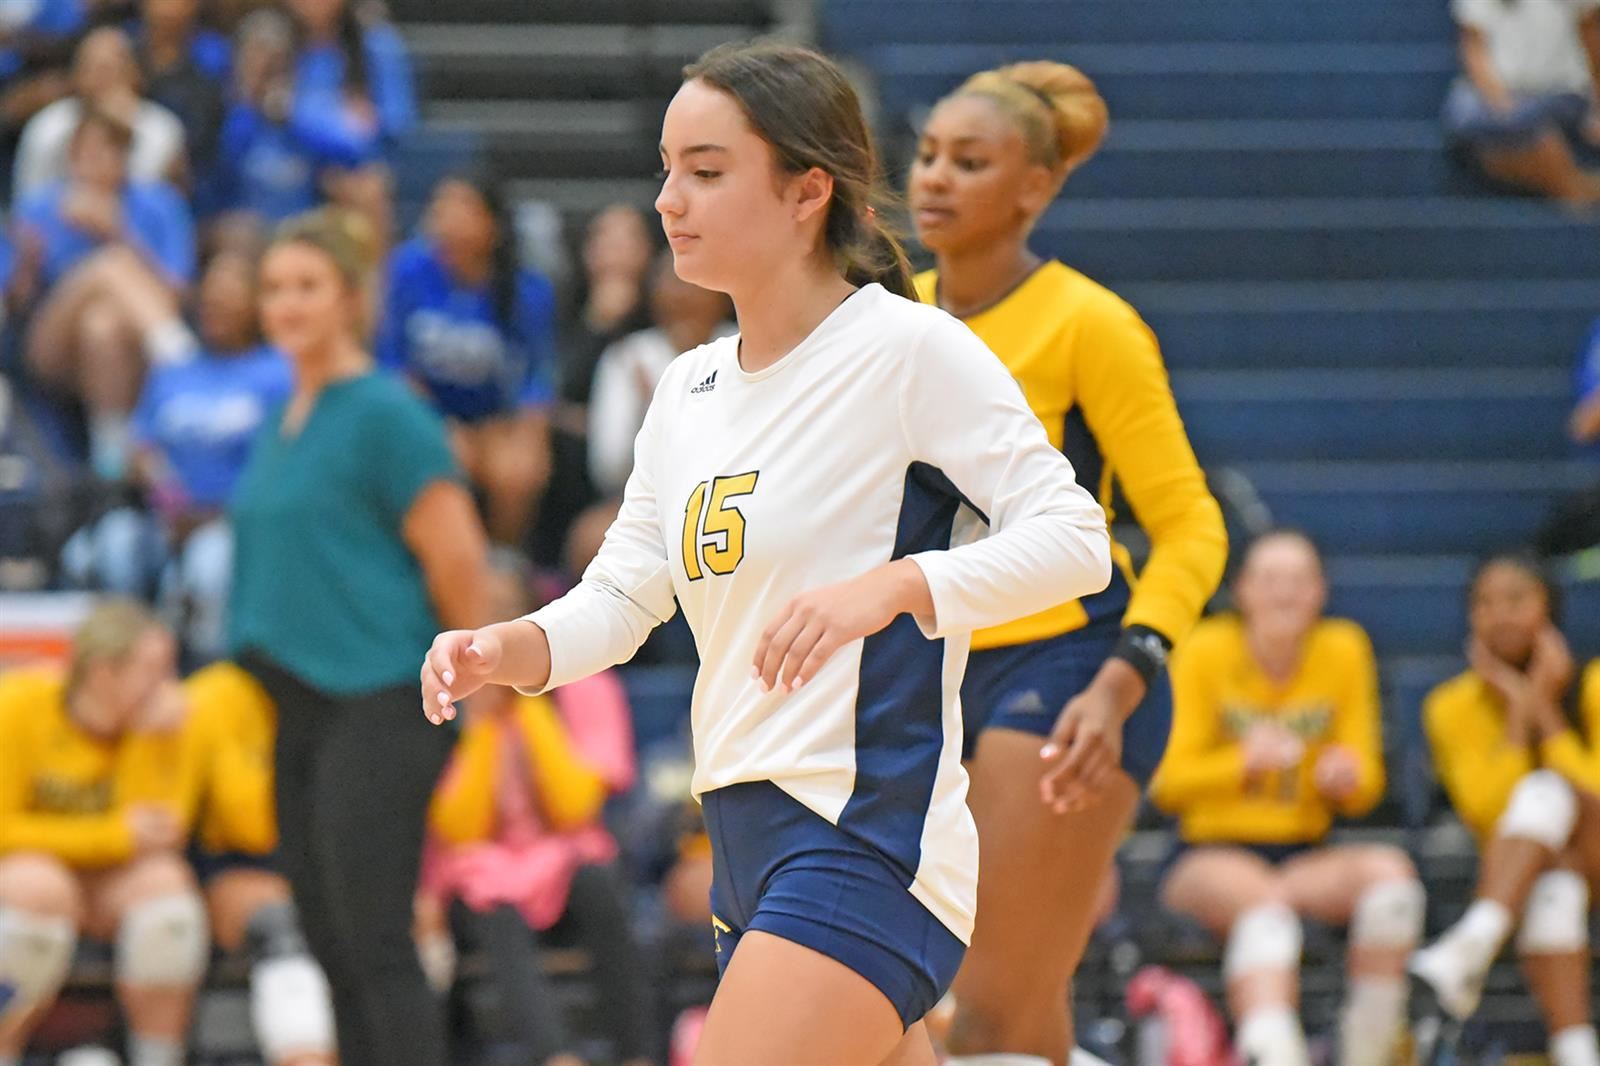 Cypress Ranch High School senior Kaitlyn Harred was named to the THSCA Academic All-State Team.